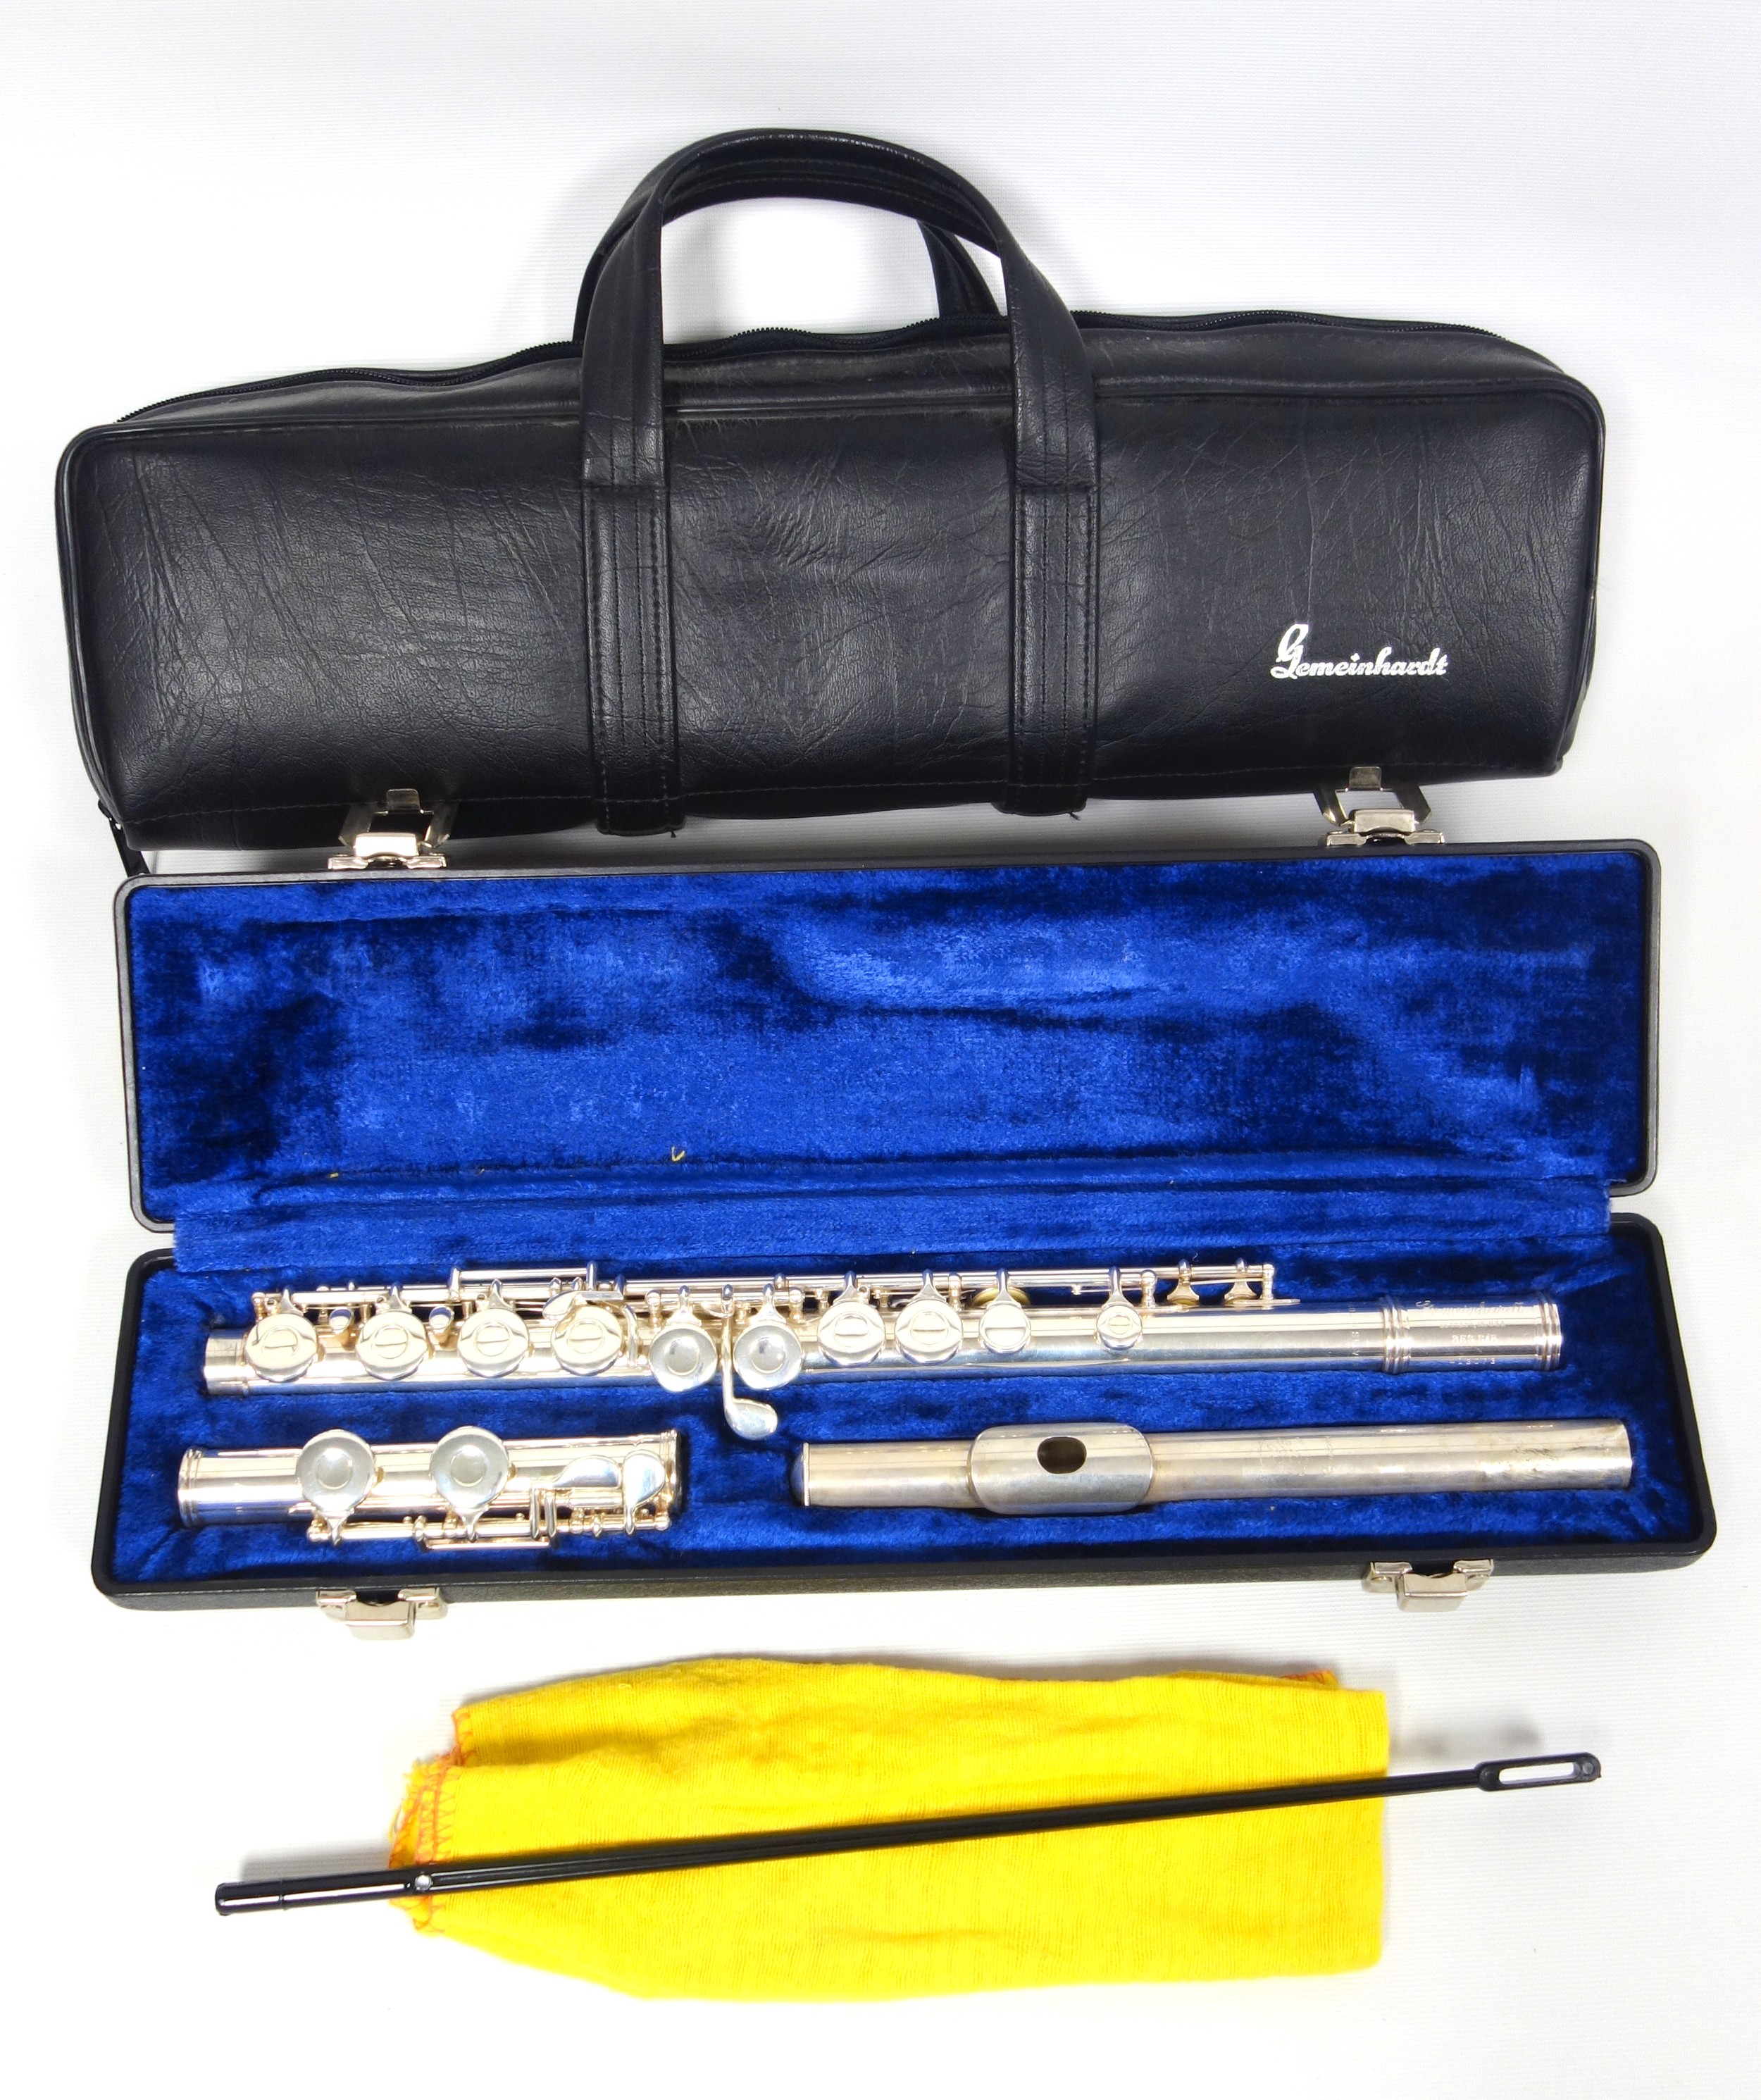 Gemeinhardt (ELKHART, IN. USA), 'Solid Silver' flute, 2ES S/E, 413073, cased, together with a